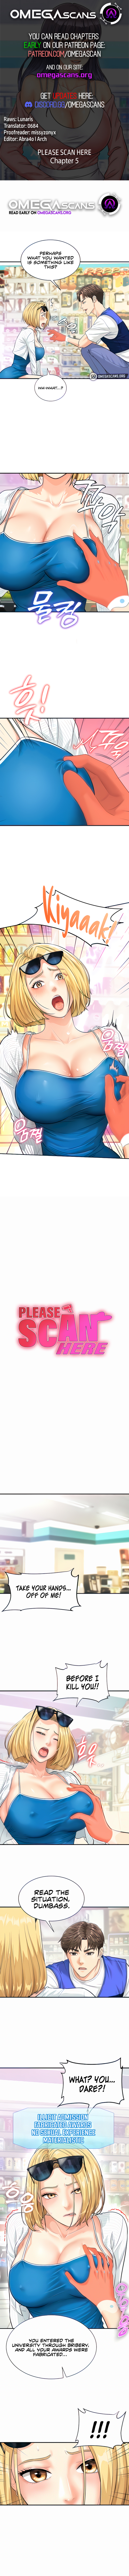 Please Scan Here NEW image